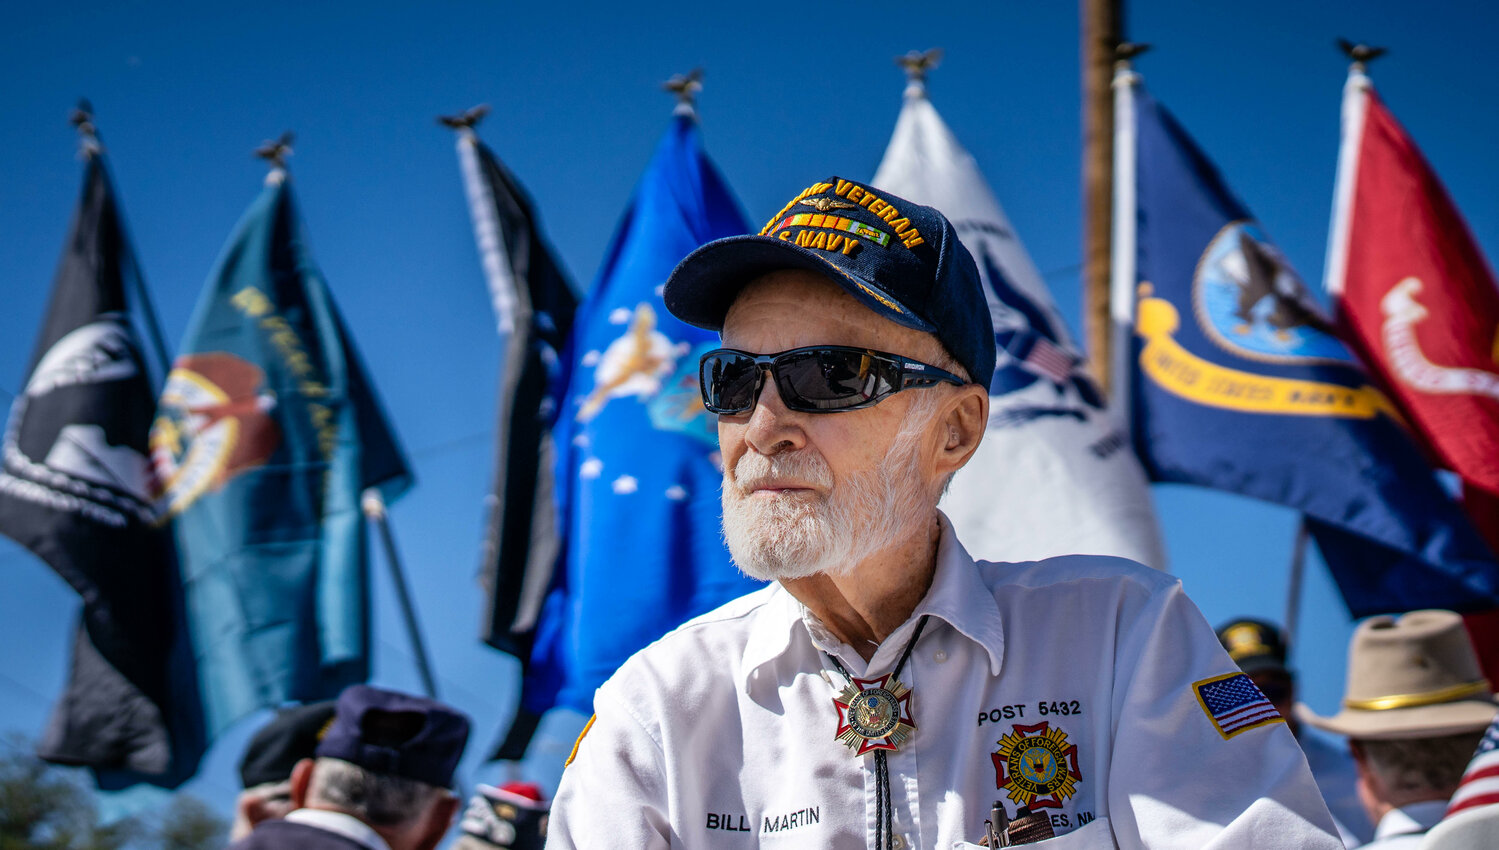 Corrales resident and Vietnam Veteran Bill Martin waits to ride on a float during the Corrales Fourth of July Parade Tuesday morning. (Roberto E. Rosales/Corrales Comment)